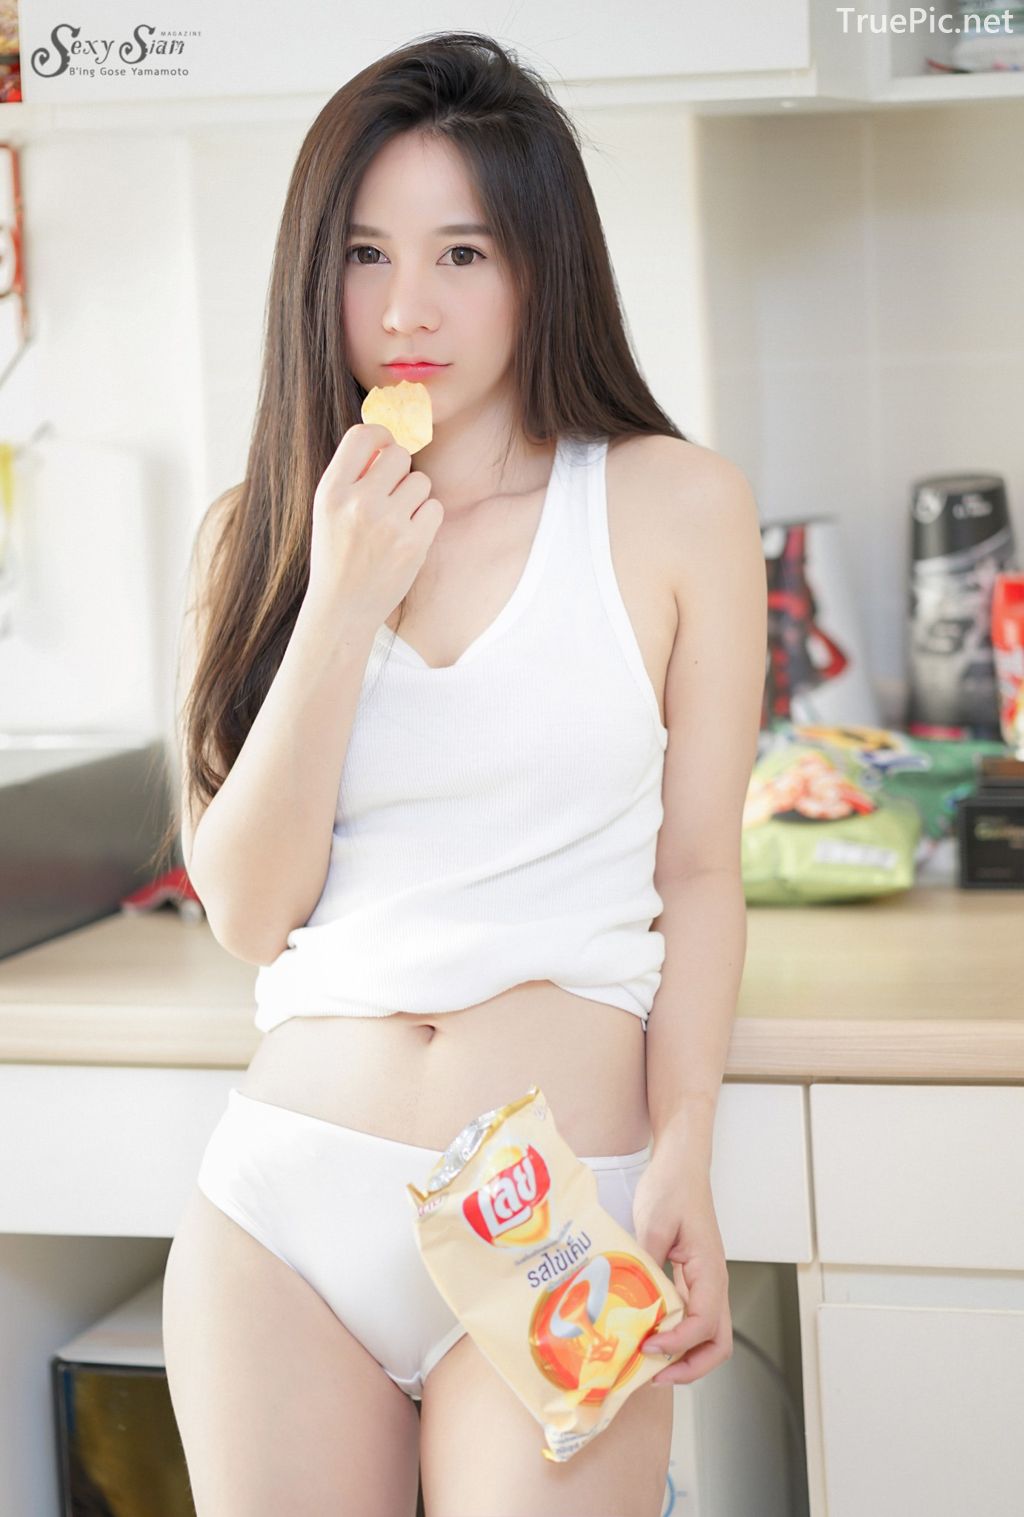 Thailand Sexy Girl - จิดาภา ตั้งสุขสบายดี (Pockyming) - Snack Lays for lazy day - TruePic.net - Picture 19